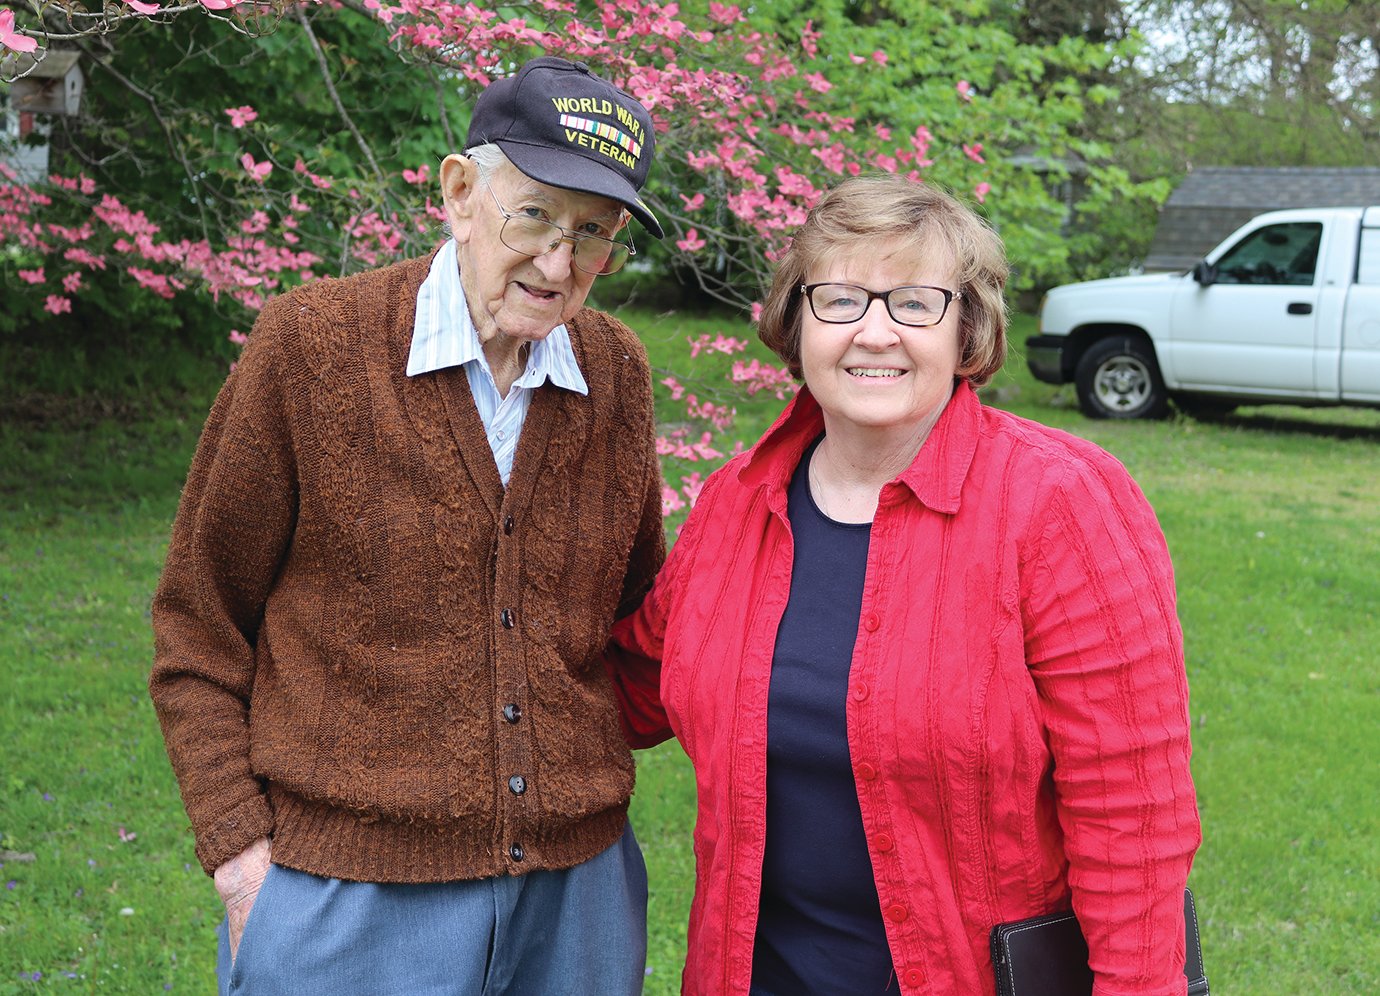 Archie Krout and neighbor Debbie Threlkeld celebrate his 98th birthday in 2020 outside Krout's home as they await a surprise parade honoring the World War II veteran. Dozens of friends, family, fellow veterans and members of the community were on hand, either alongside Krout or honking while displaying signs of appreciation as they drove past.